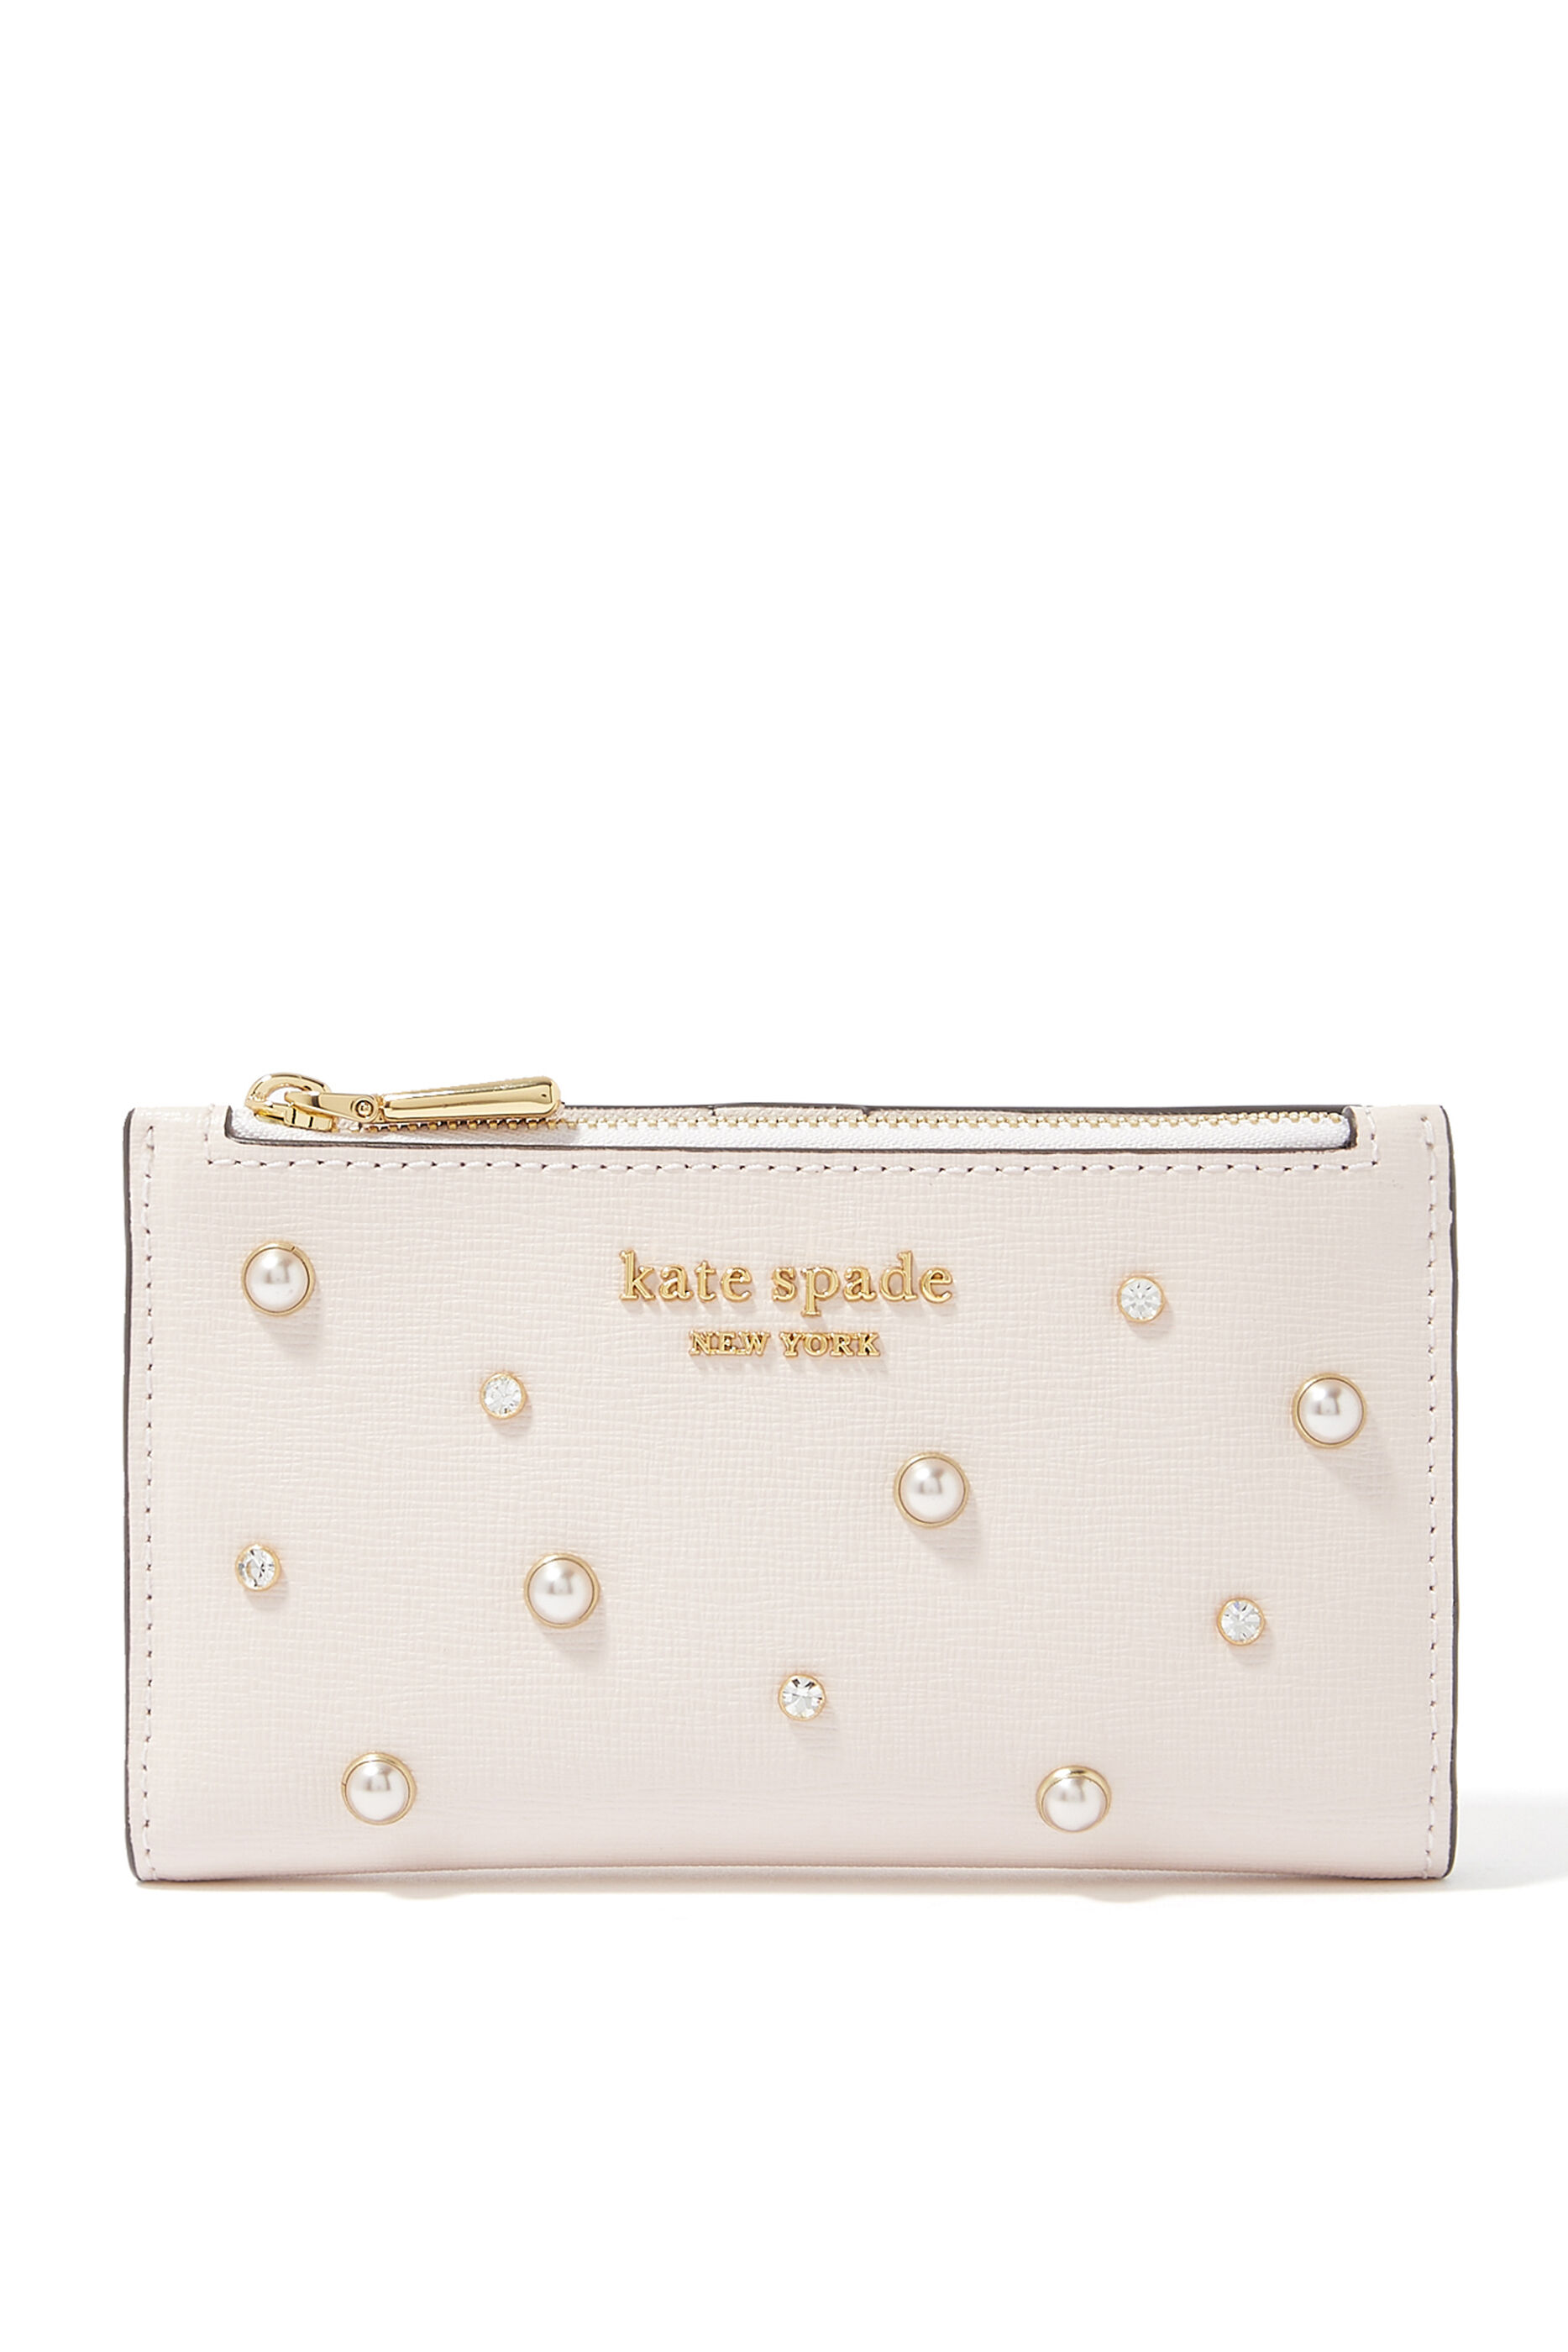 Buy Kate Spade Purl Embellished Saffiano Leather Small Slim Bi